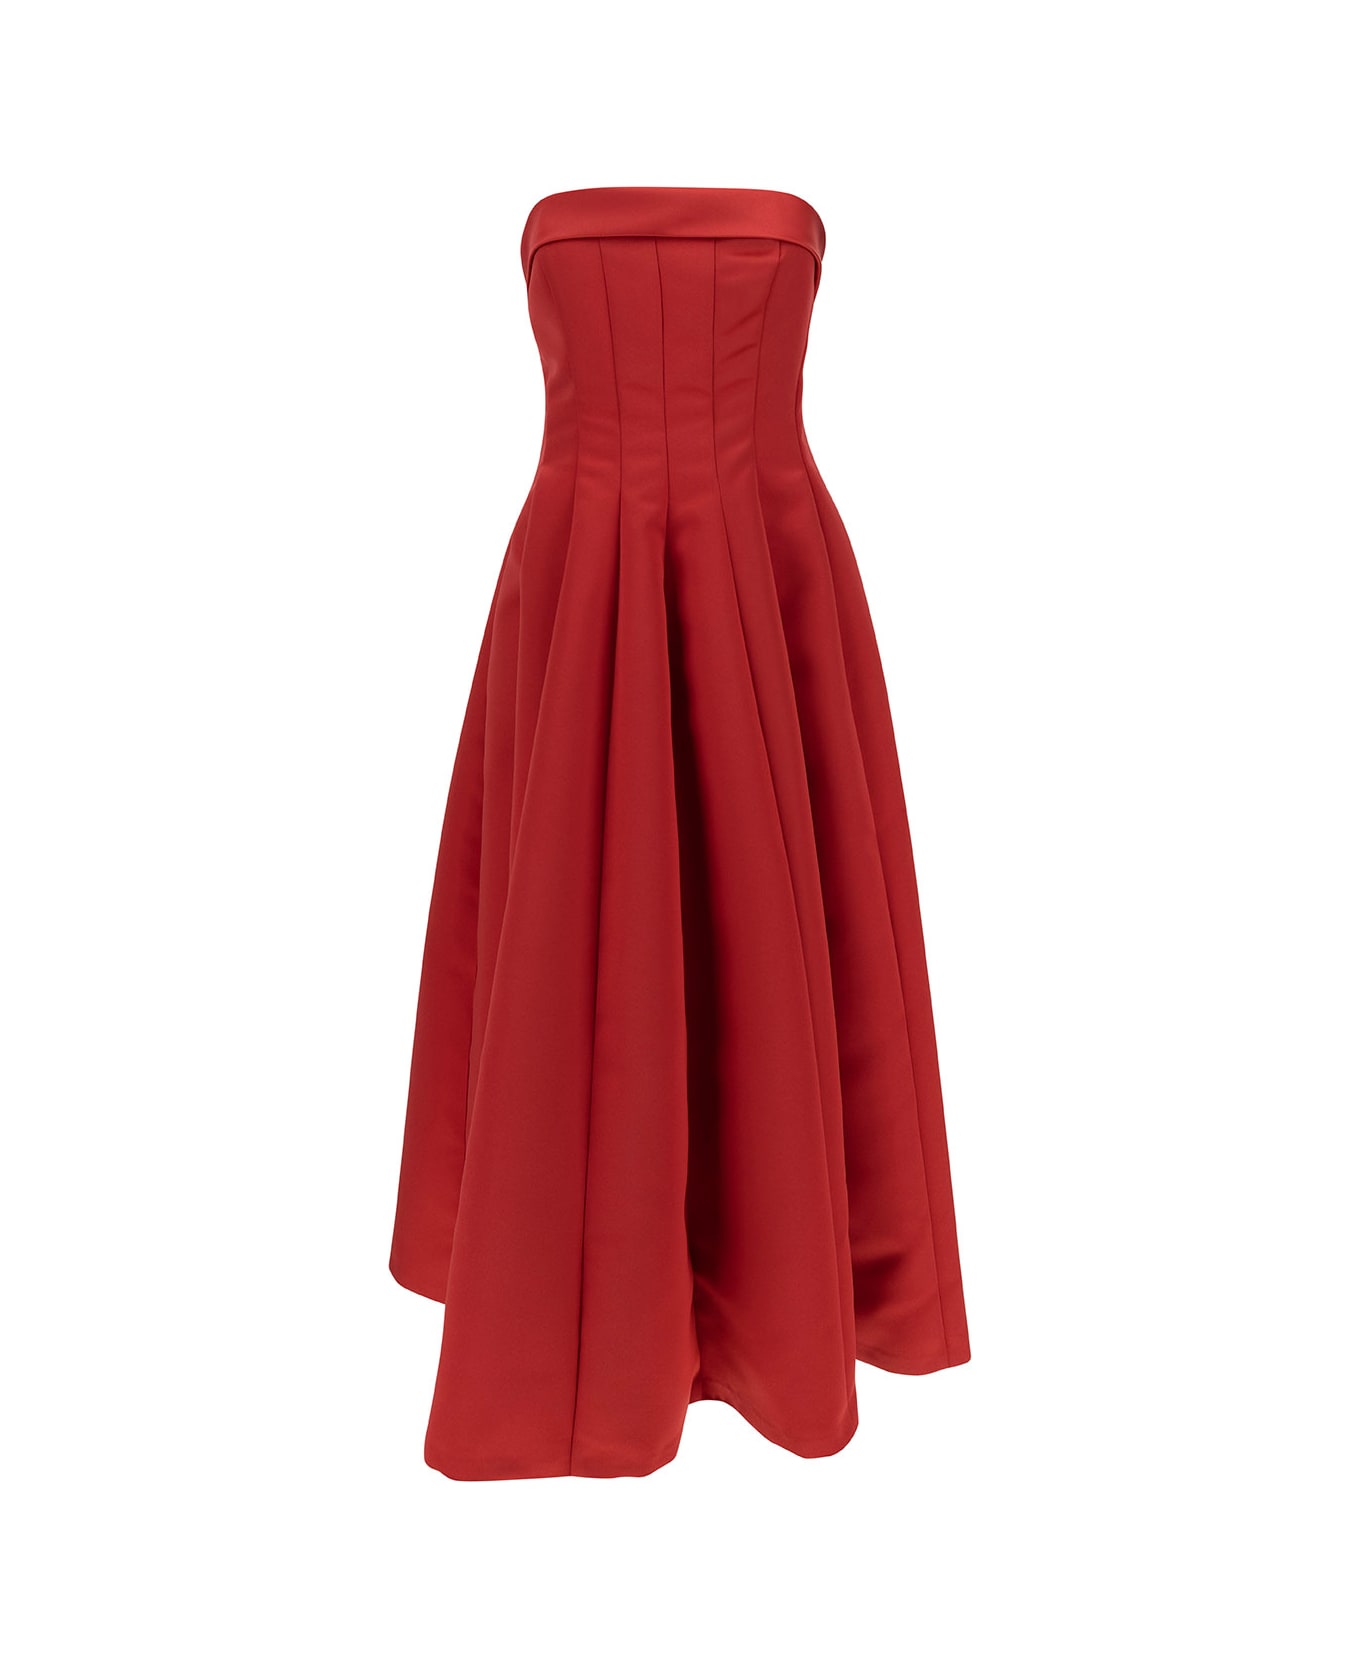 Philosophy di Lorenzo Serafini Longuette Red Dress With Flared Skirt In Duchesse Woman - Red